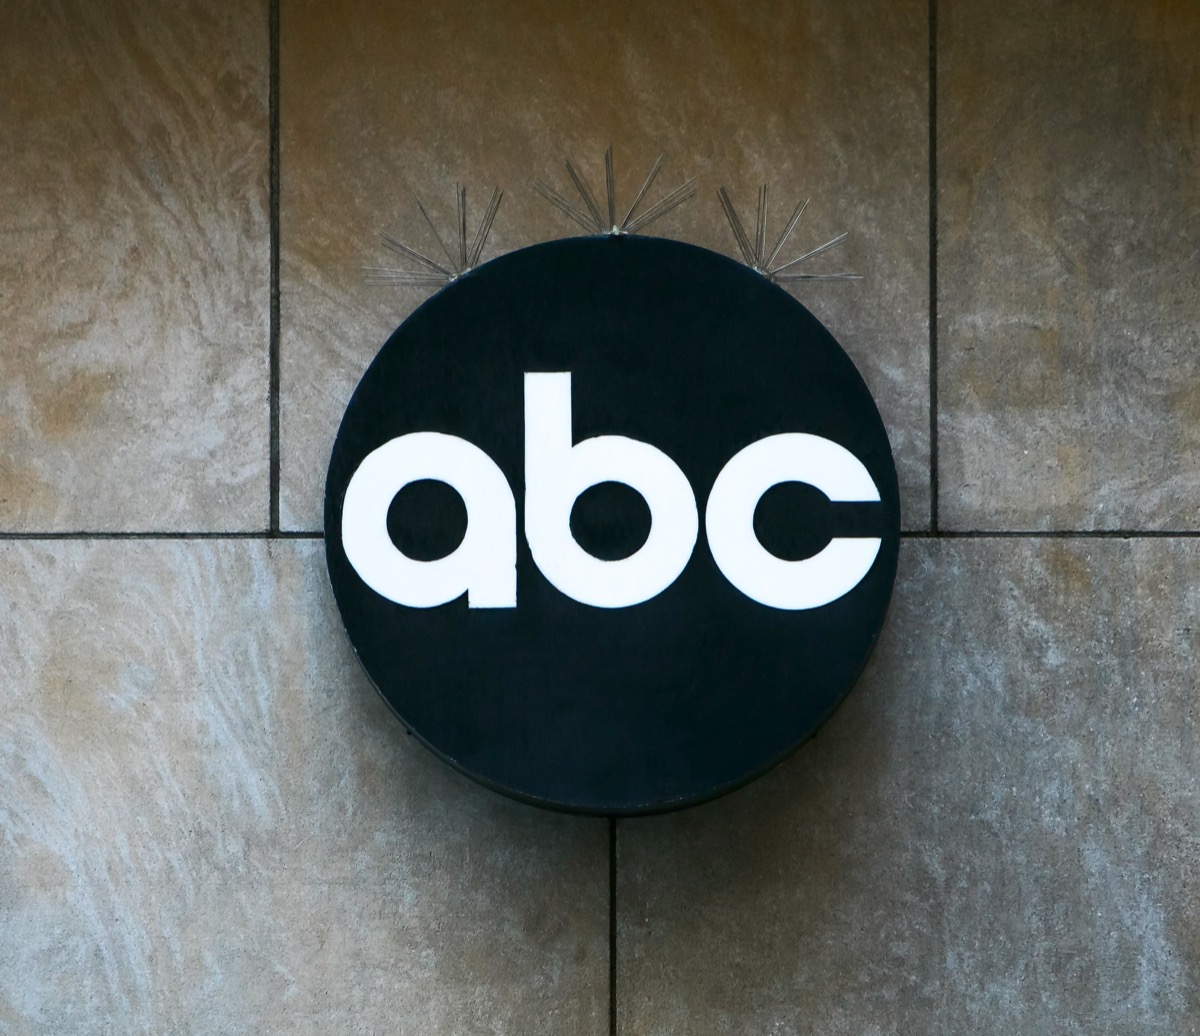 A logo of the American Broadcasting Company is hanging outside one of the ABC's buildings on West 67th street in New York City.